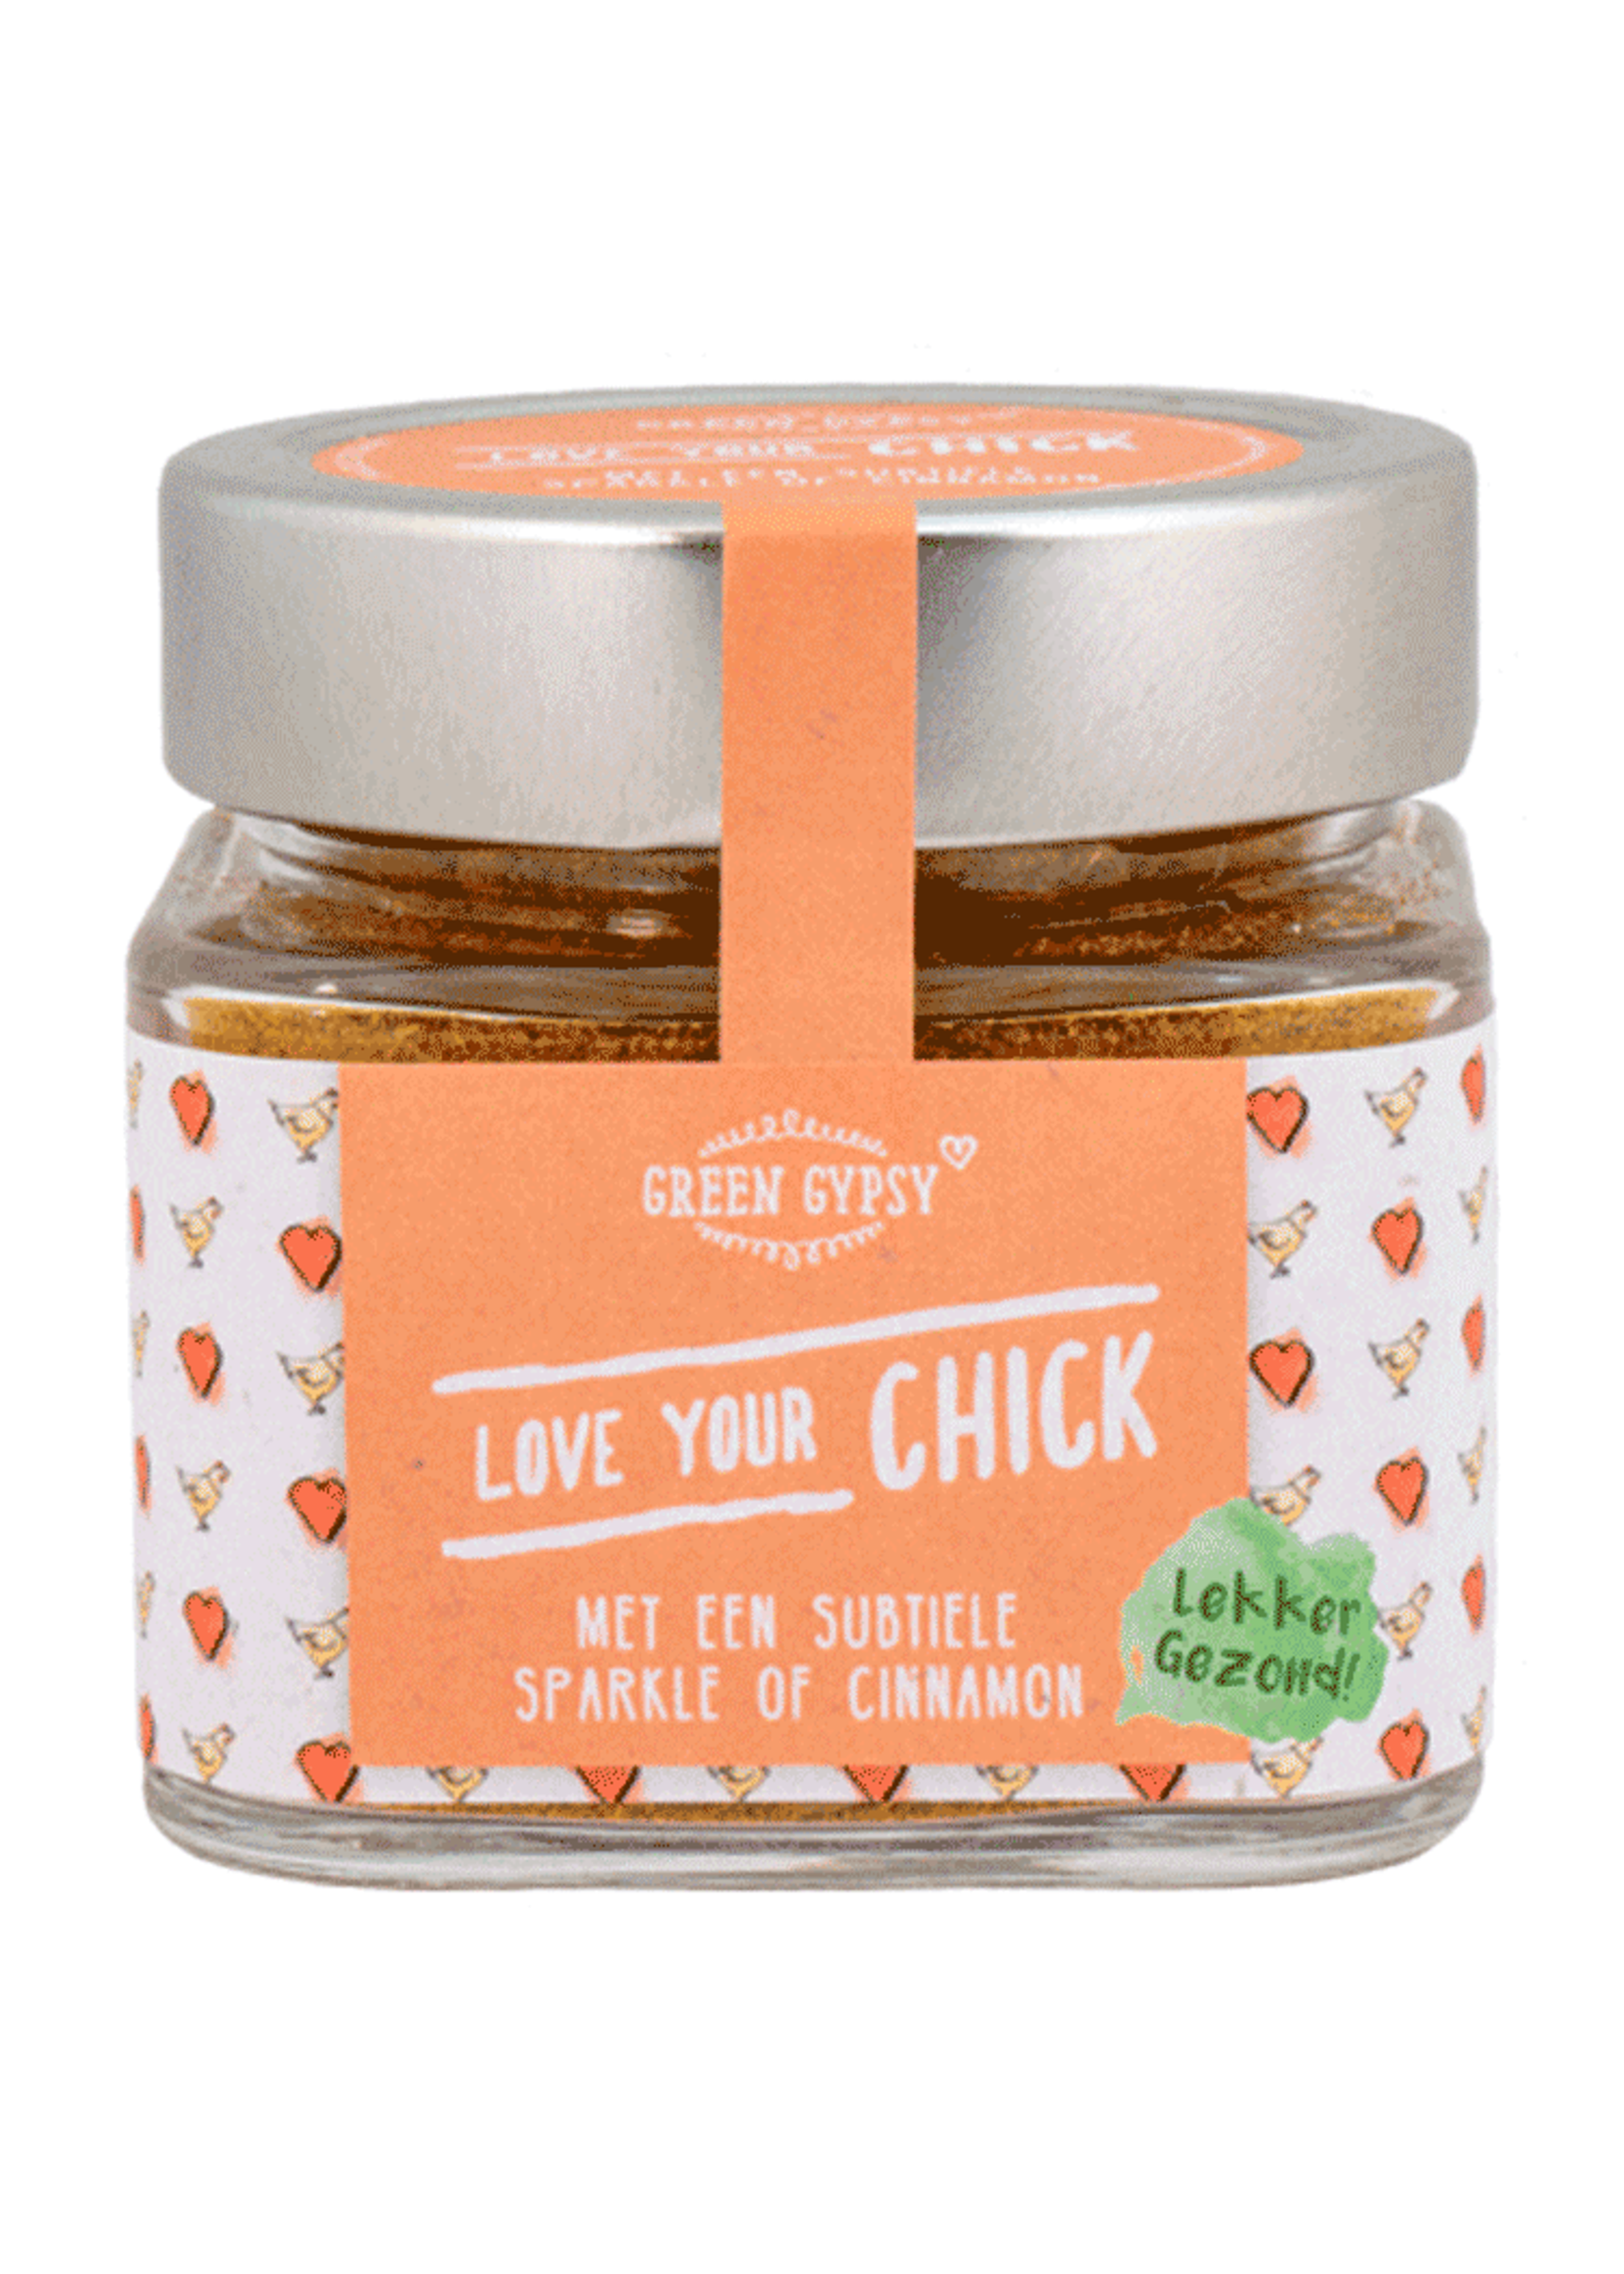 Green Gypsy Spices Kruidenmix Love Your Chick Green Gypsy